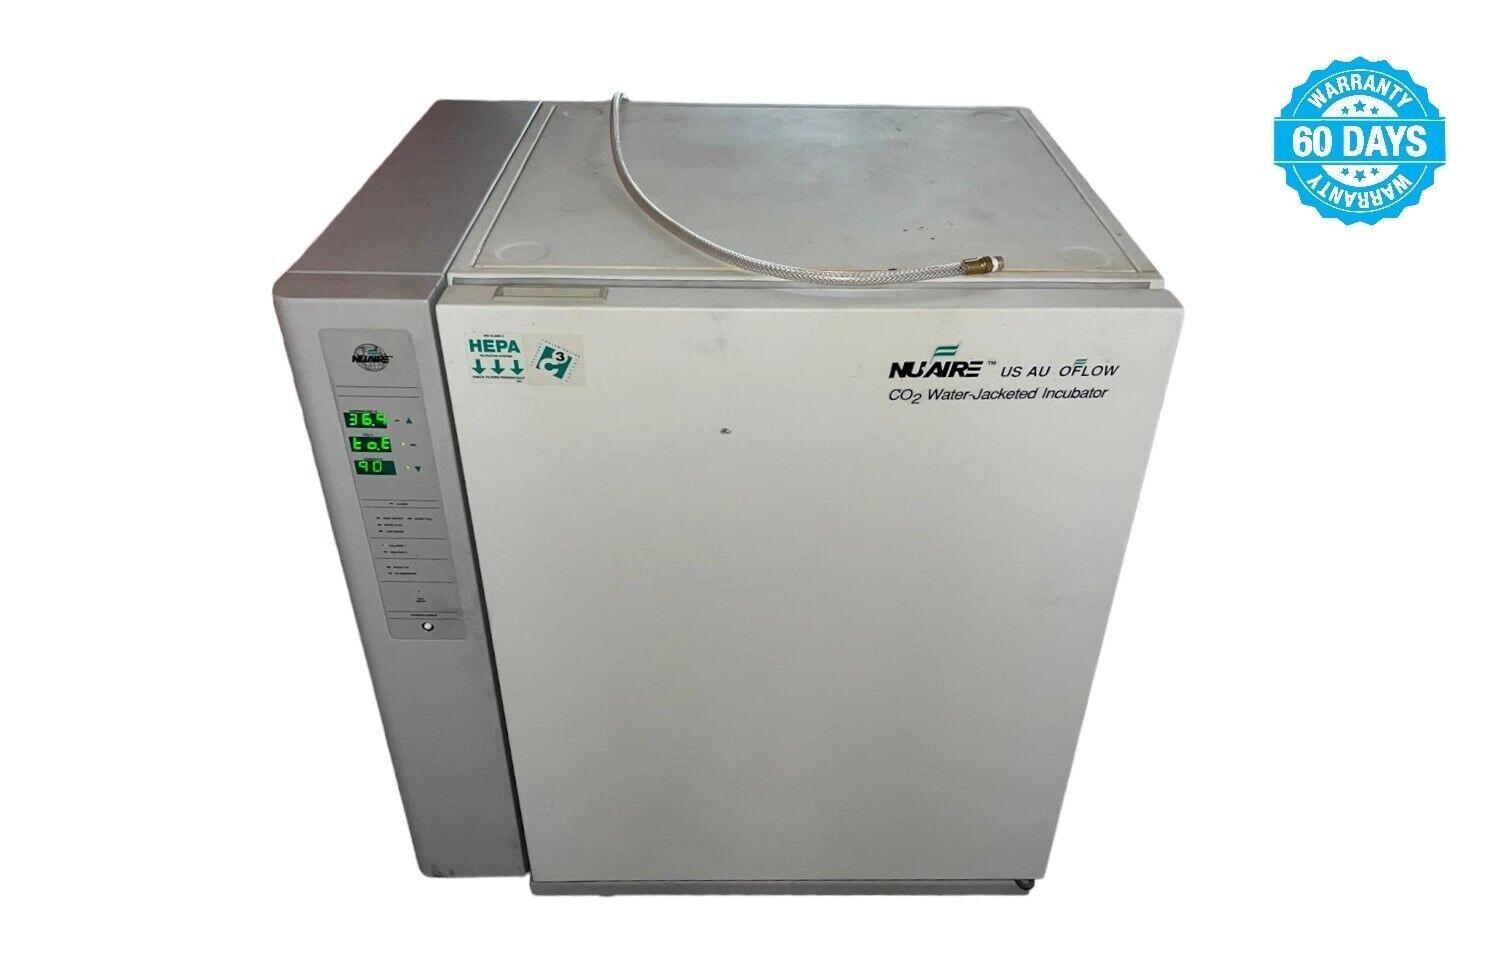 NuAire CO2 Water Jacketed Incubator Model 4850